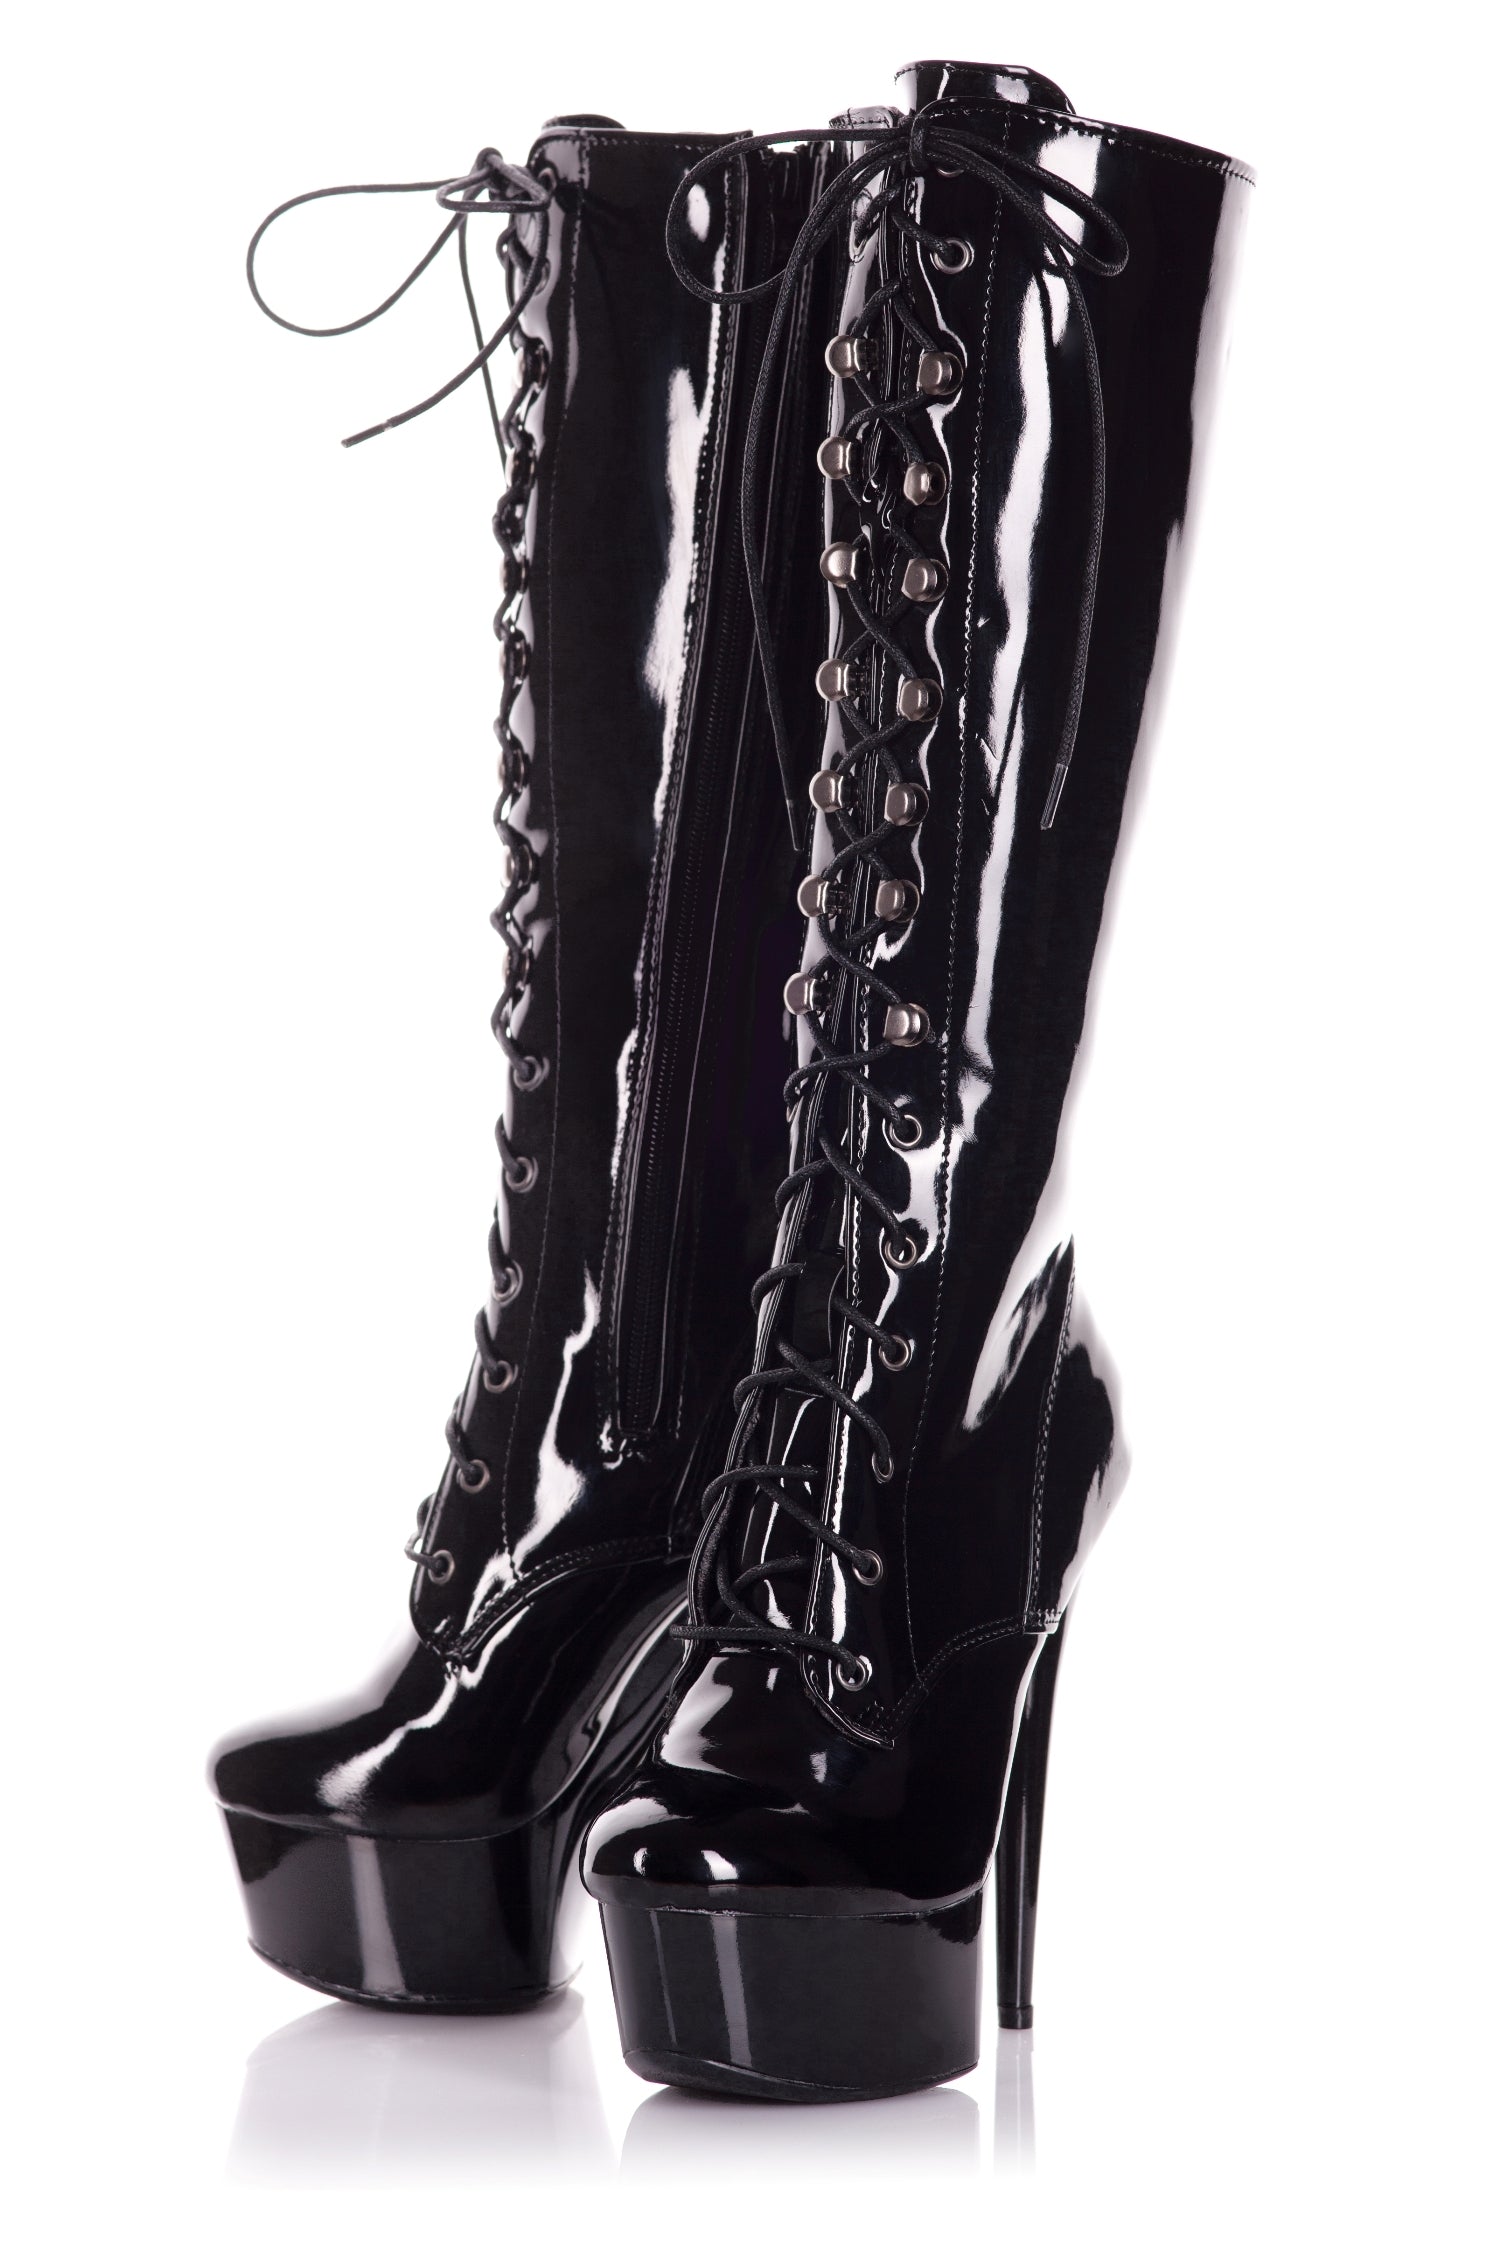 Playgirl Knee High Black Patent Lace Up Boots